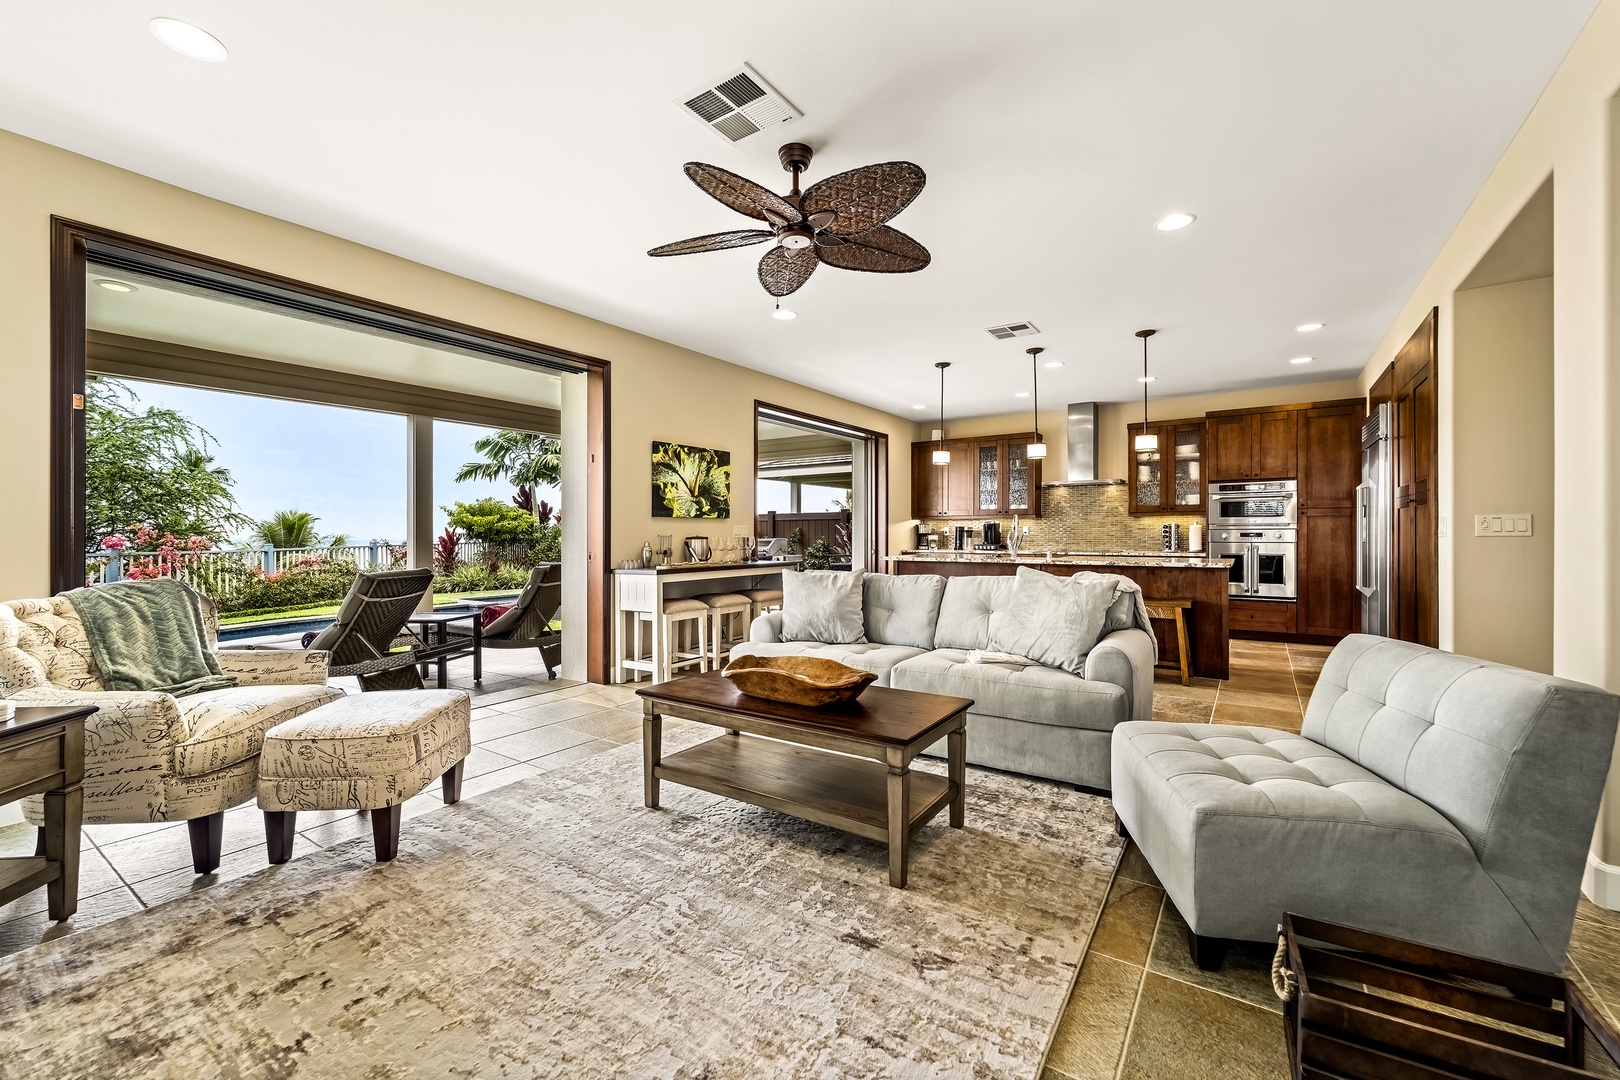 Kailua Kona Vacation Rentals, Golf Green - Spacious living room to gather with loved ones